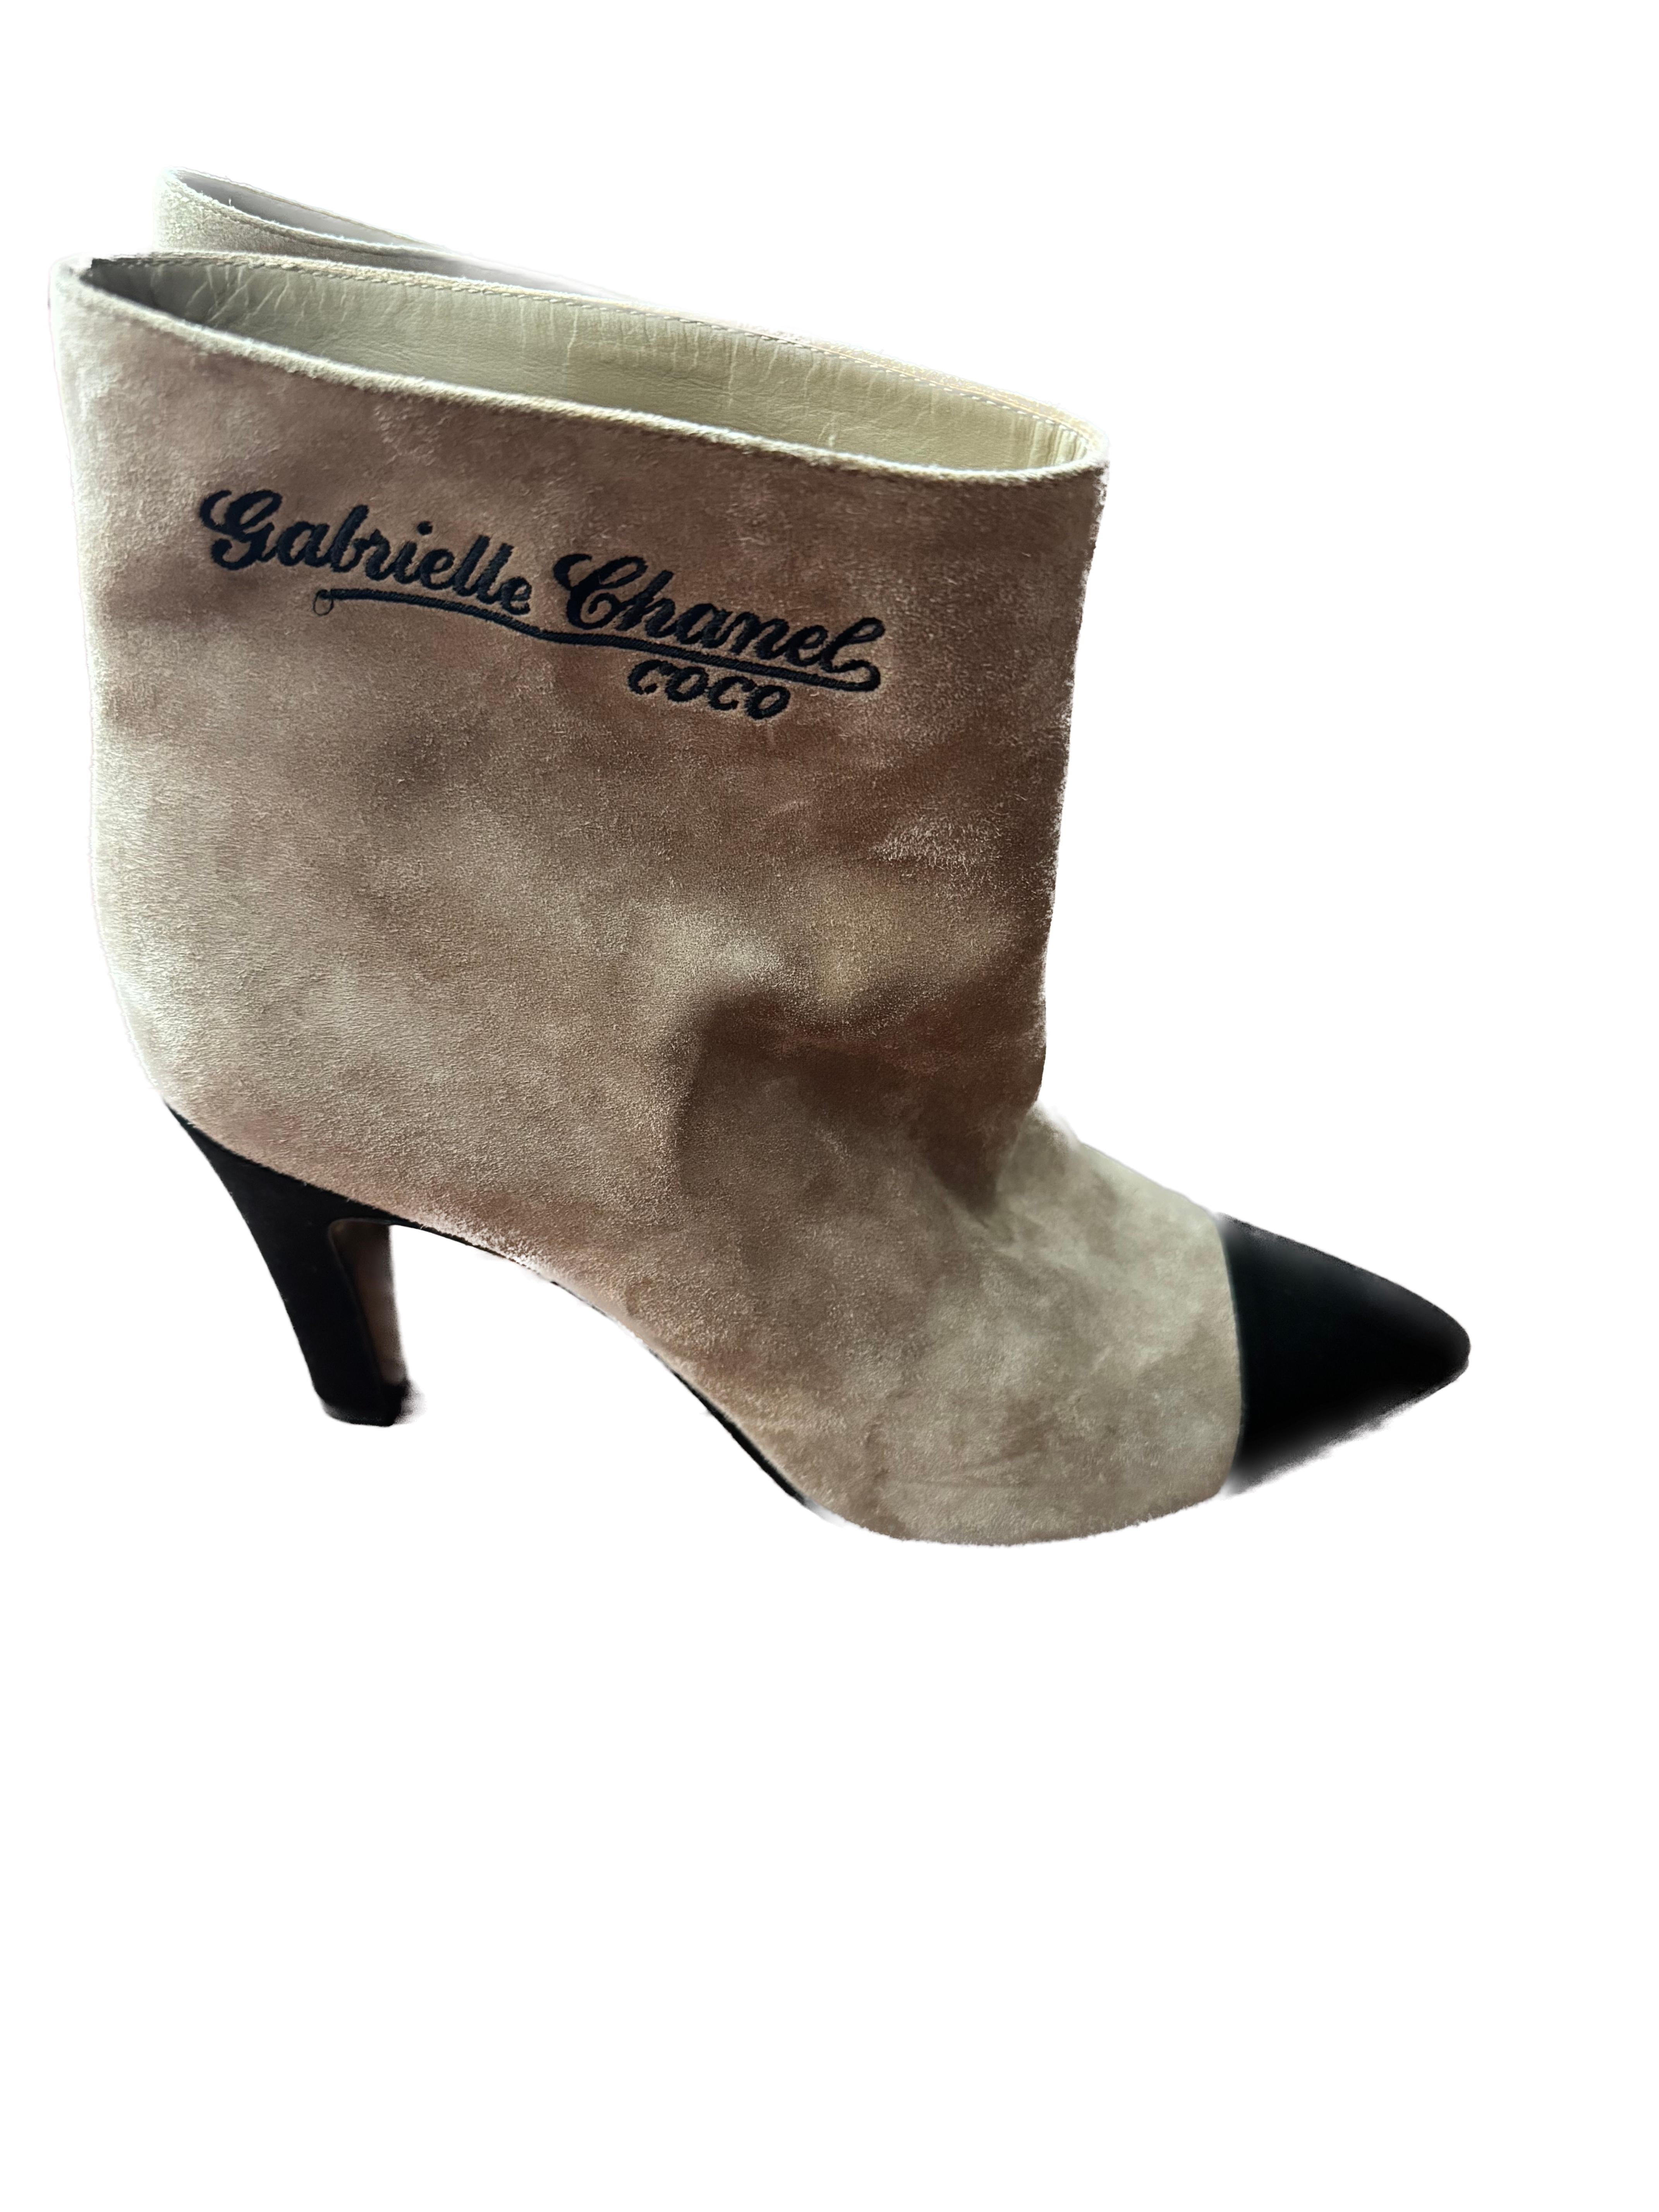 
ChatGPT
The Chanel Classic Beige/Black two-tone Gabrielle suede ankle boots in size 39 represent an iconic blend of sophistication and timeless style that the brand is renowned for.

Crafted from luxurious suede material, these ankle boots feature